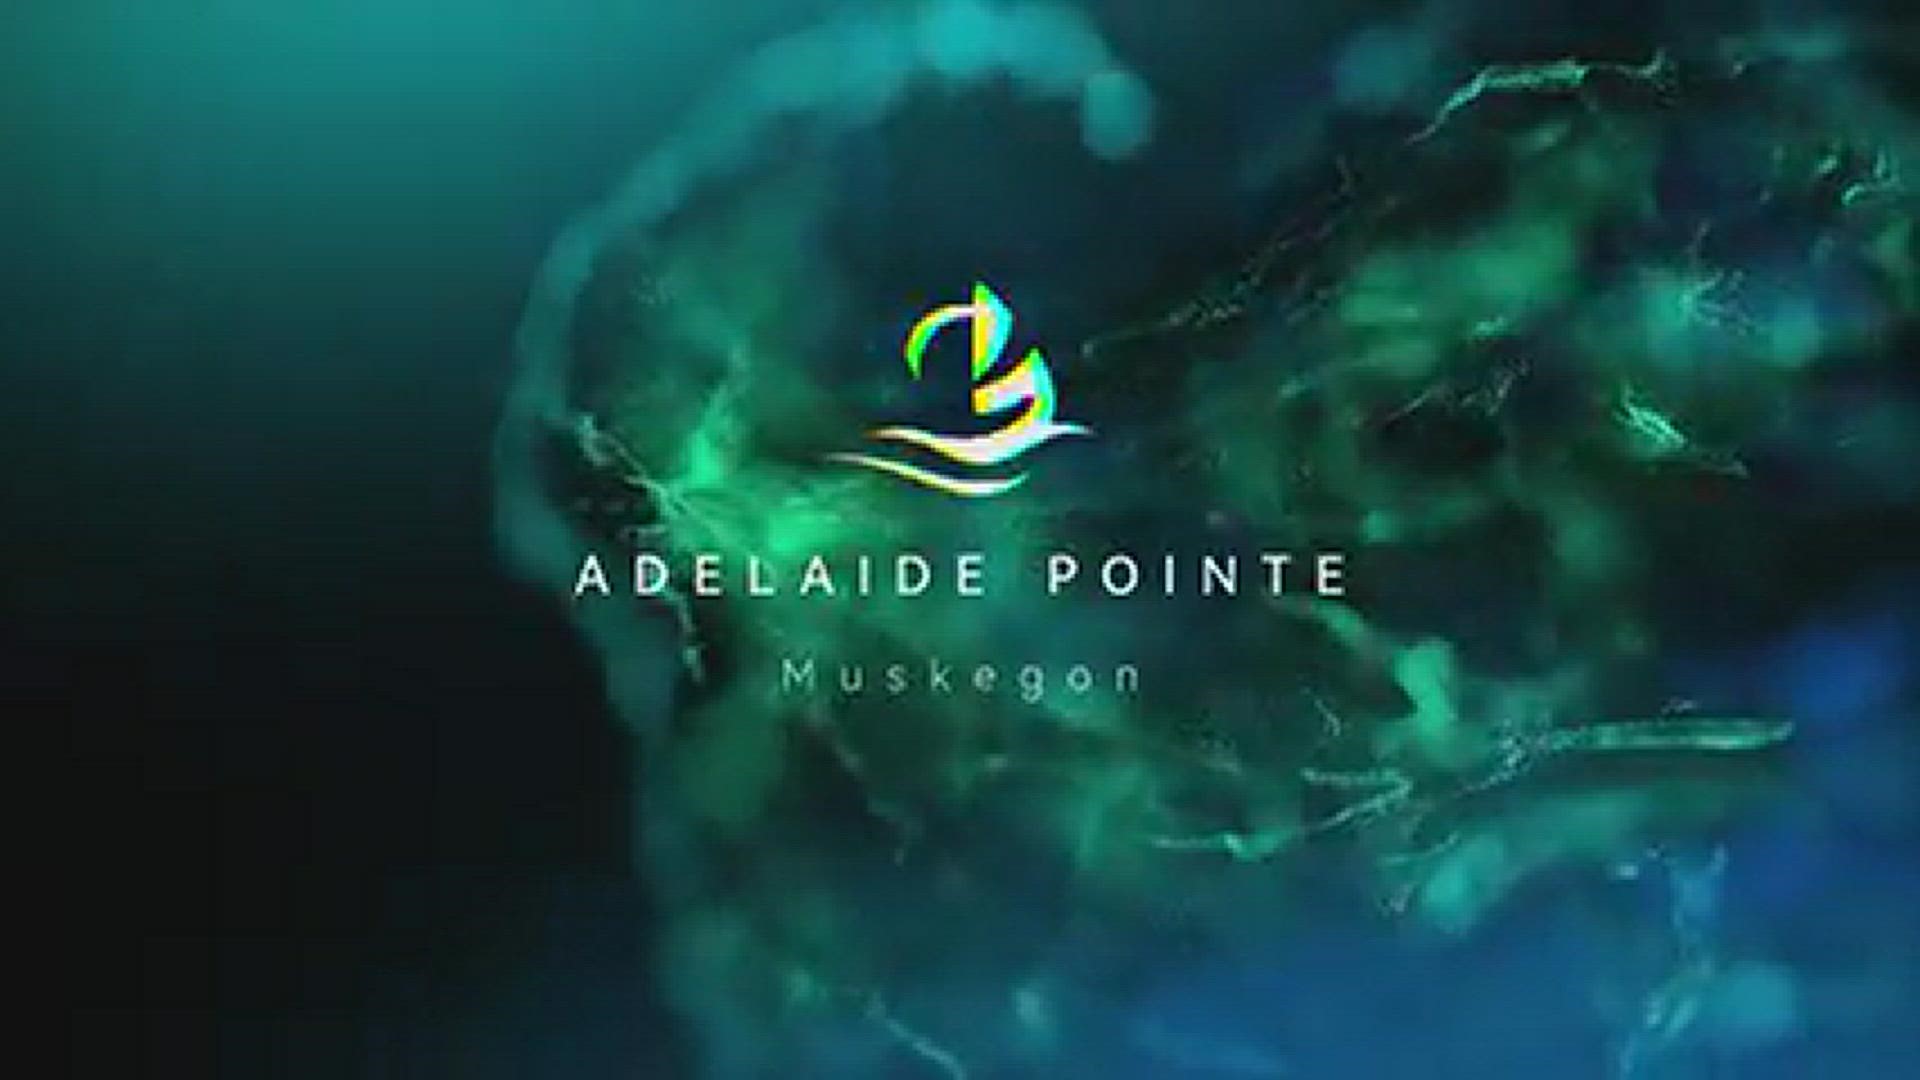 A documentary by Craig Person that takes a deep dive into the multi-million dollar Adelaide Pointe project in Muskegon.